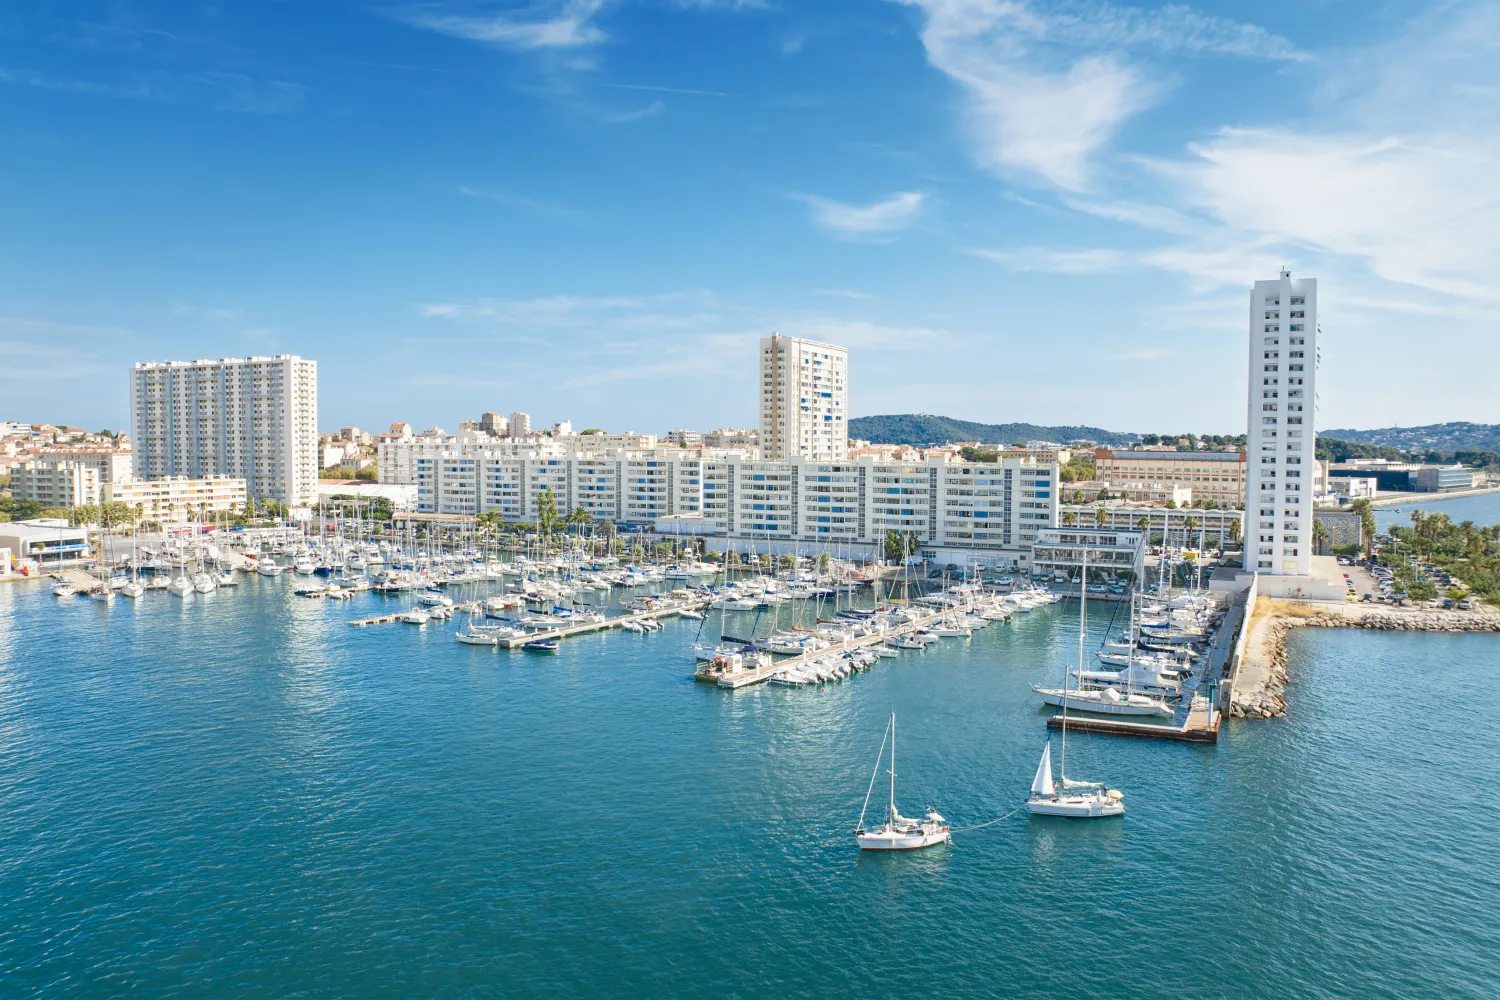 Aerial view of the port and marina of Toulon